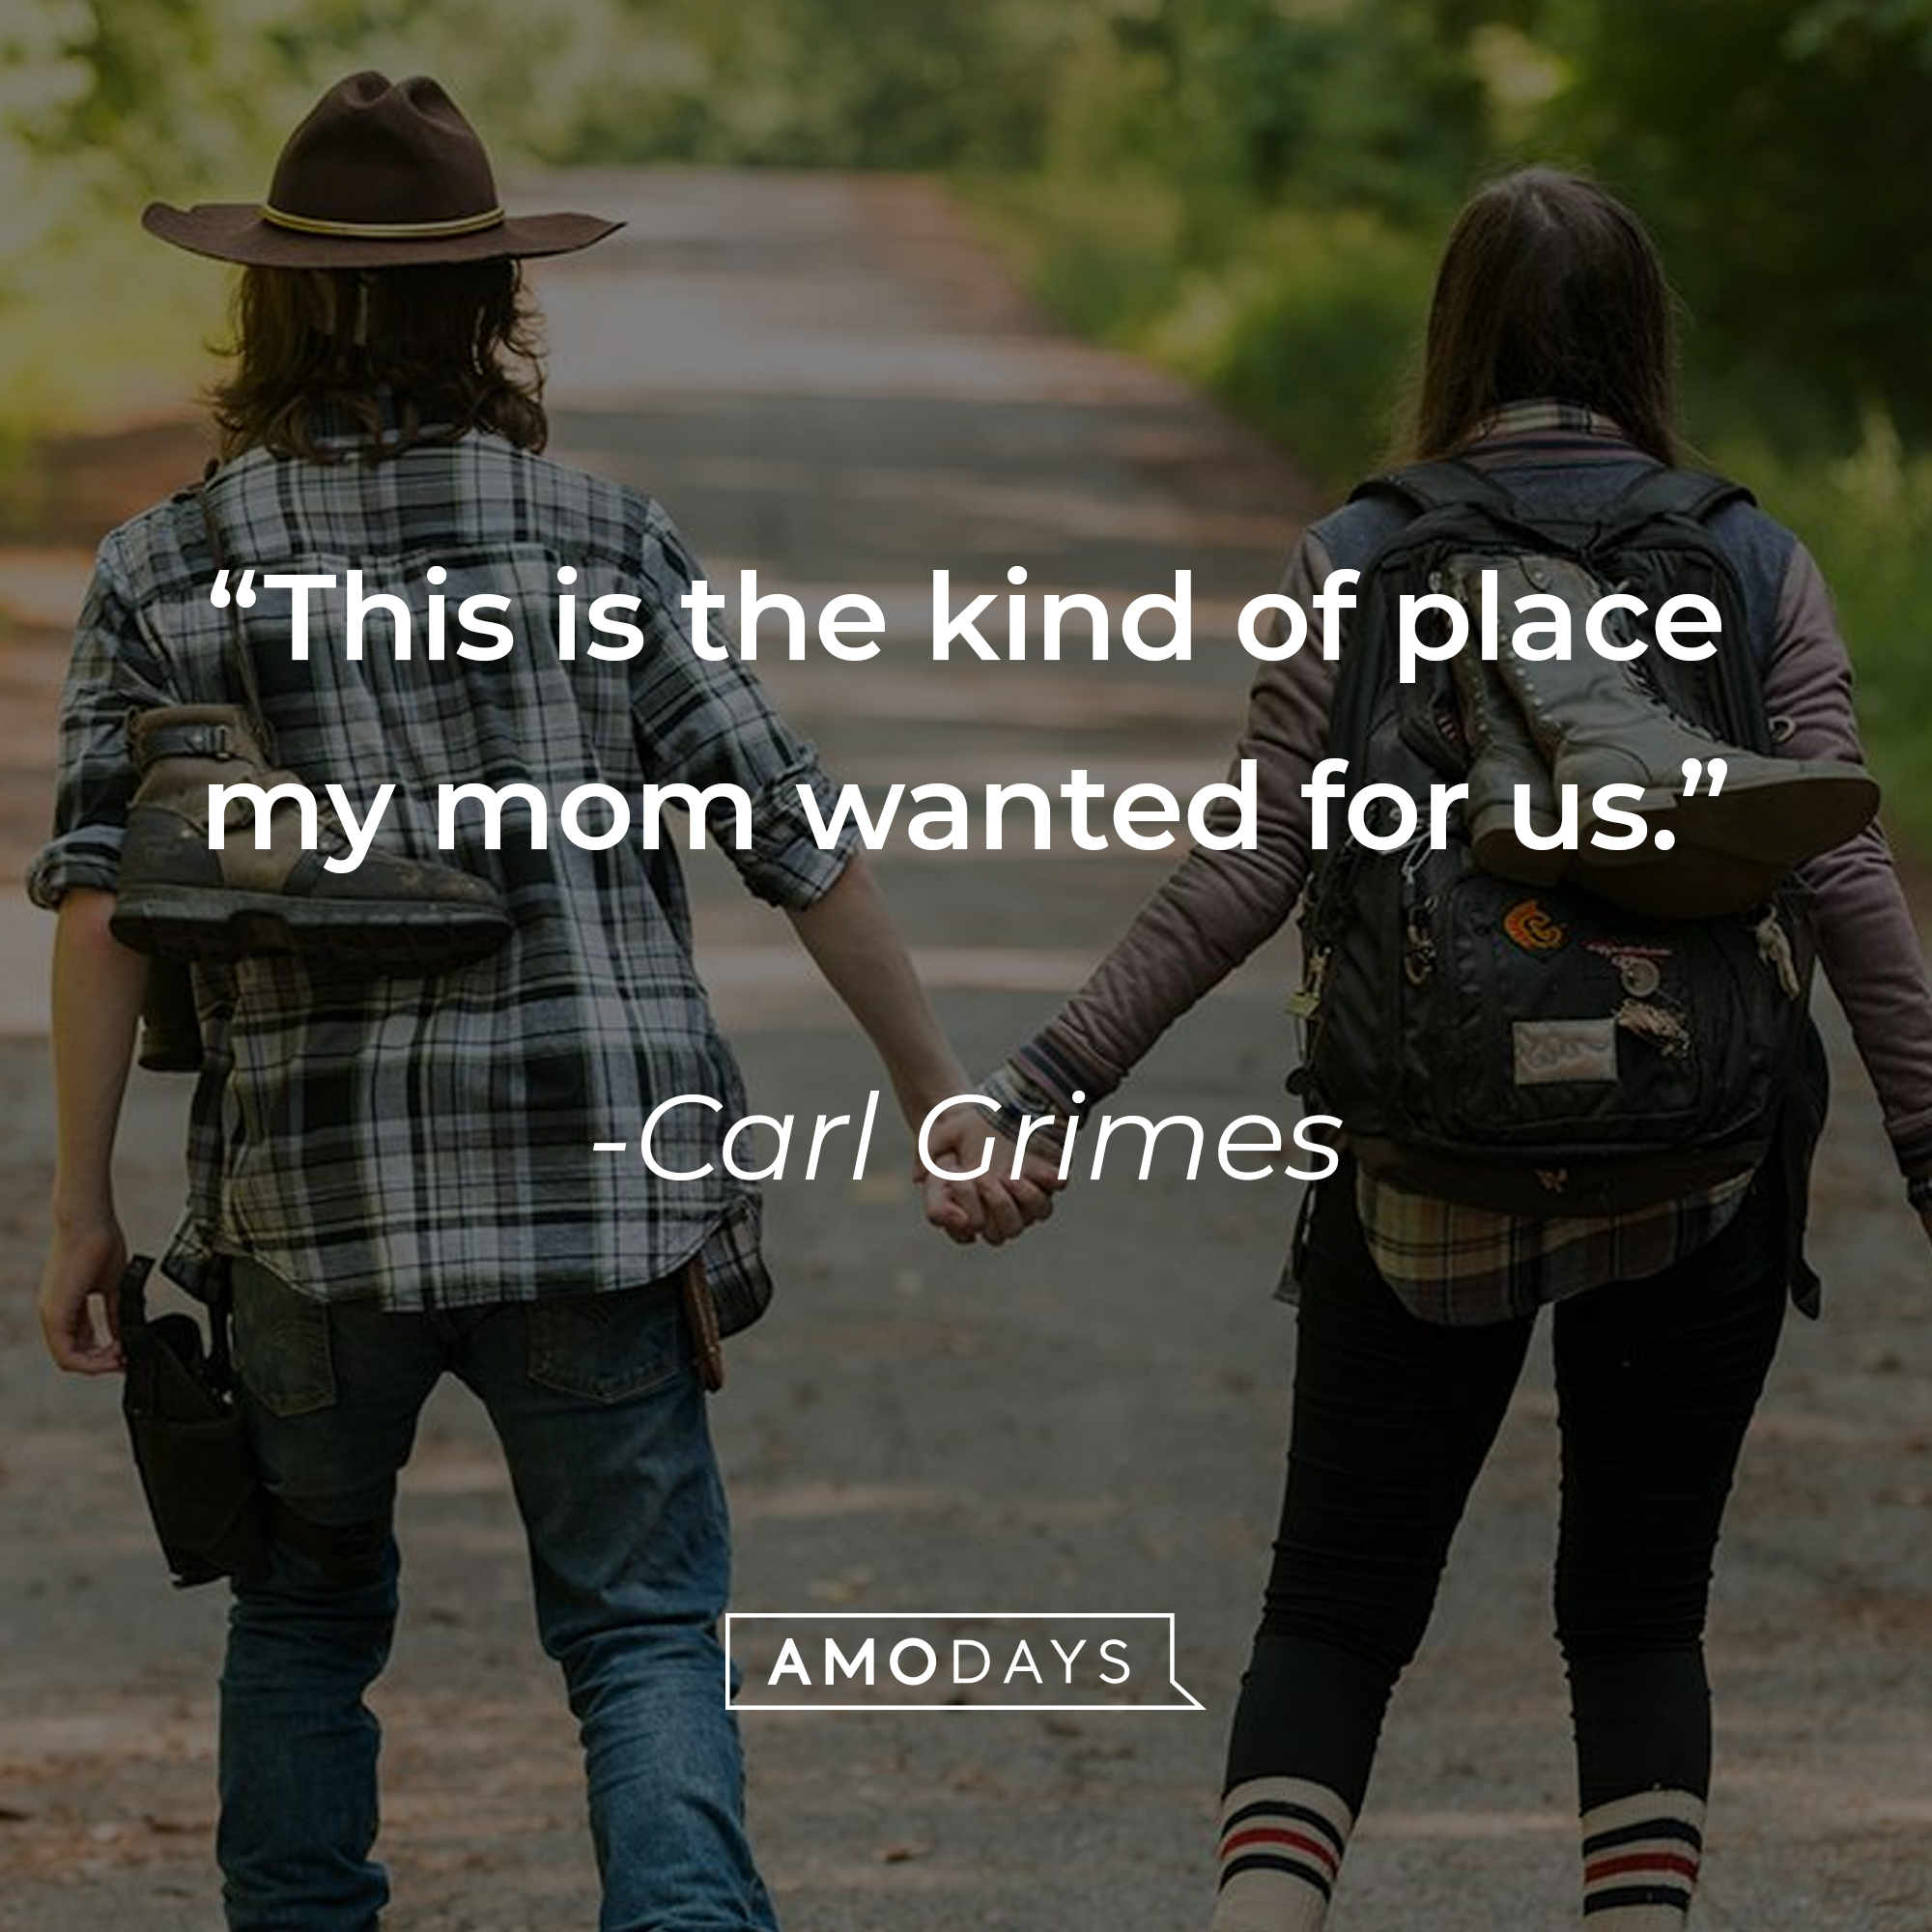 Carl Grimes, with his quote “This is the kind of place my mom wanted for us.”  | Source: facebook.com/TheWalkingDeadAMCwanted for us.” | Source: facebook.com/TheWalkingDeadAMC